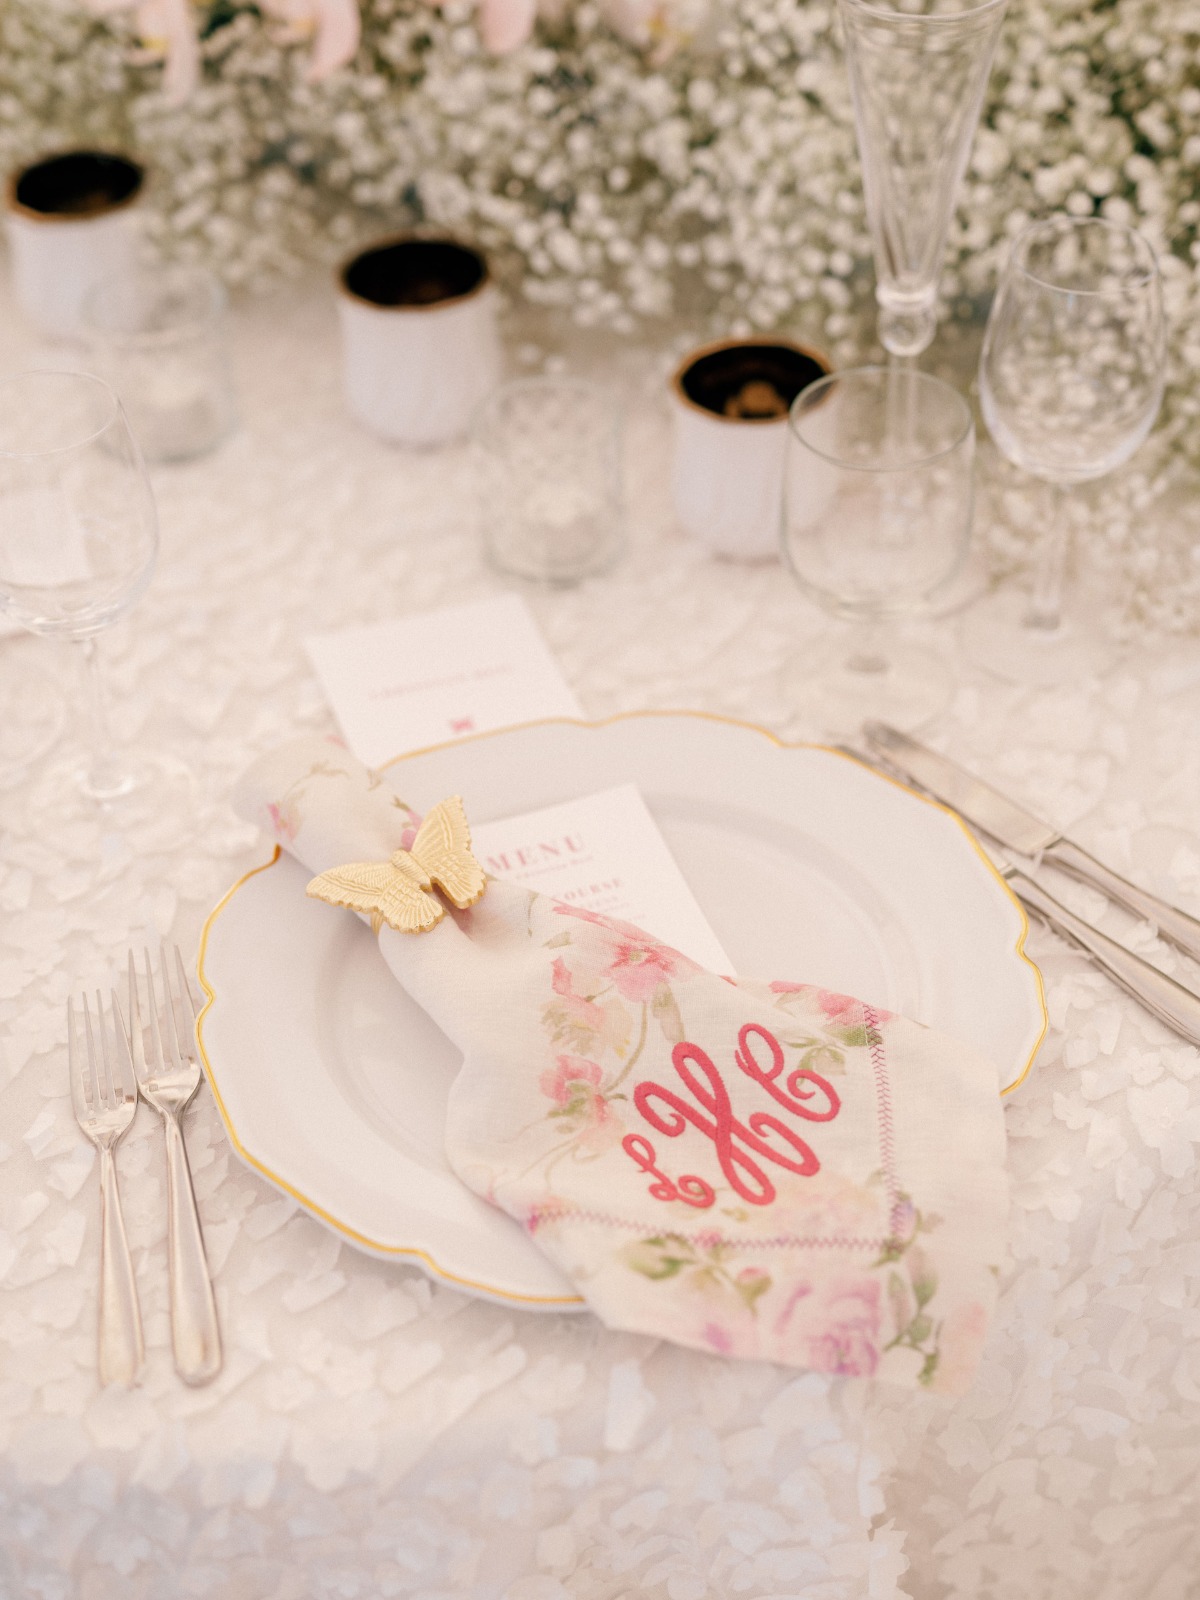 Reception place setting with butterfly napkin holder and monogrammed napkin